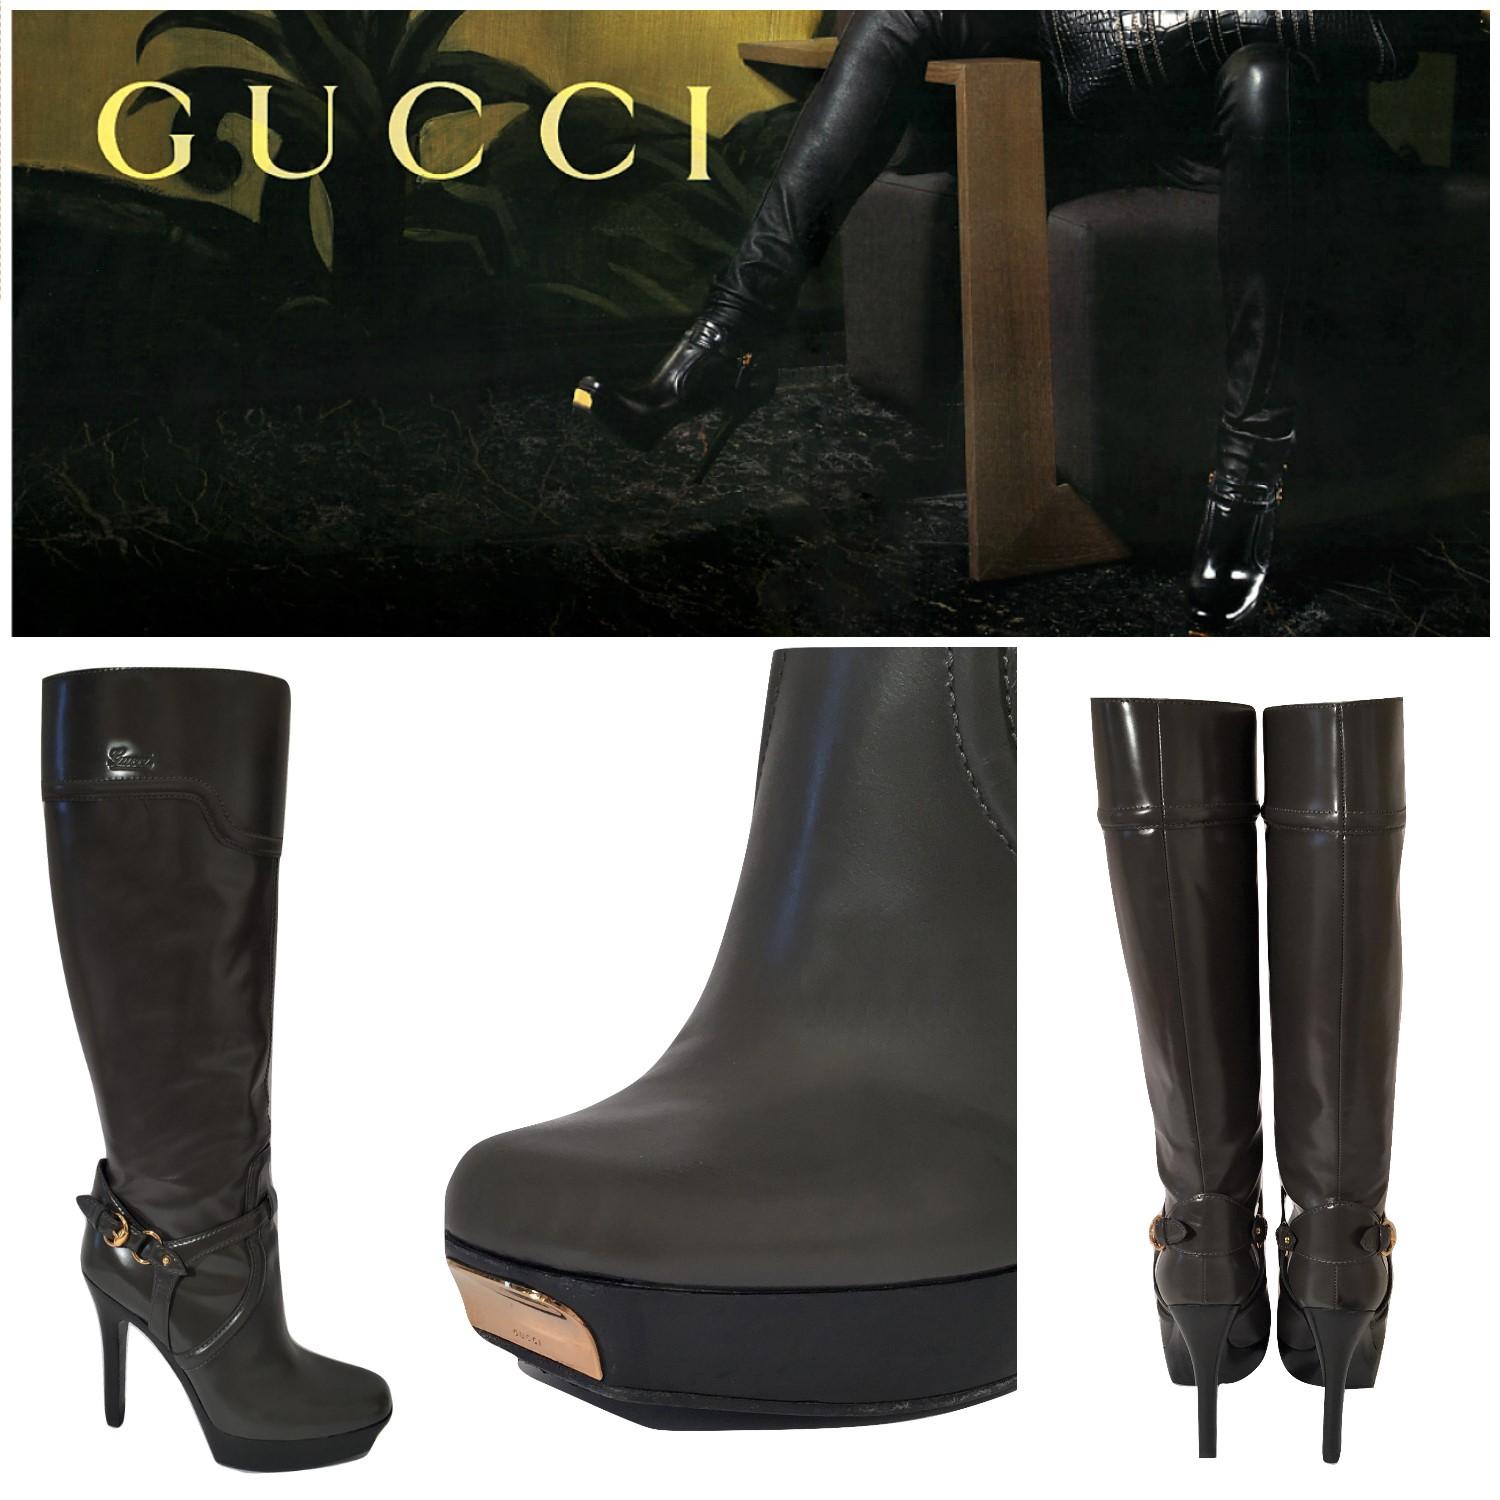 Gucci Platform Boots
Worn Twice Excellent Condition
* Rare Platform Boots
* U.S. Size: 6
* Soft Gray Leather
* Gold Hardware
* Gold Toe Tips
* 1.5